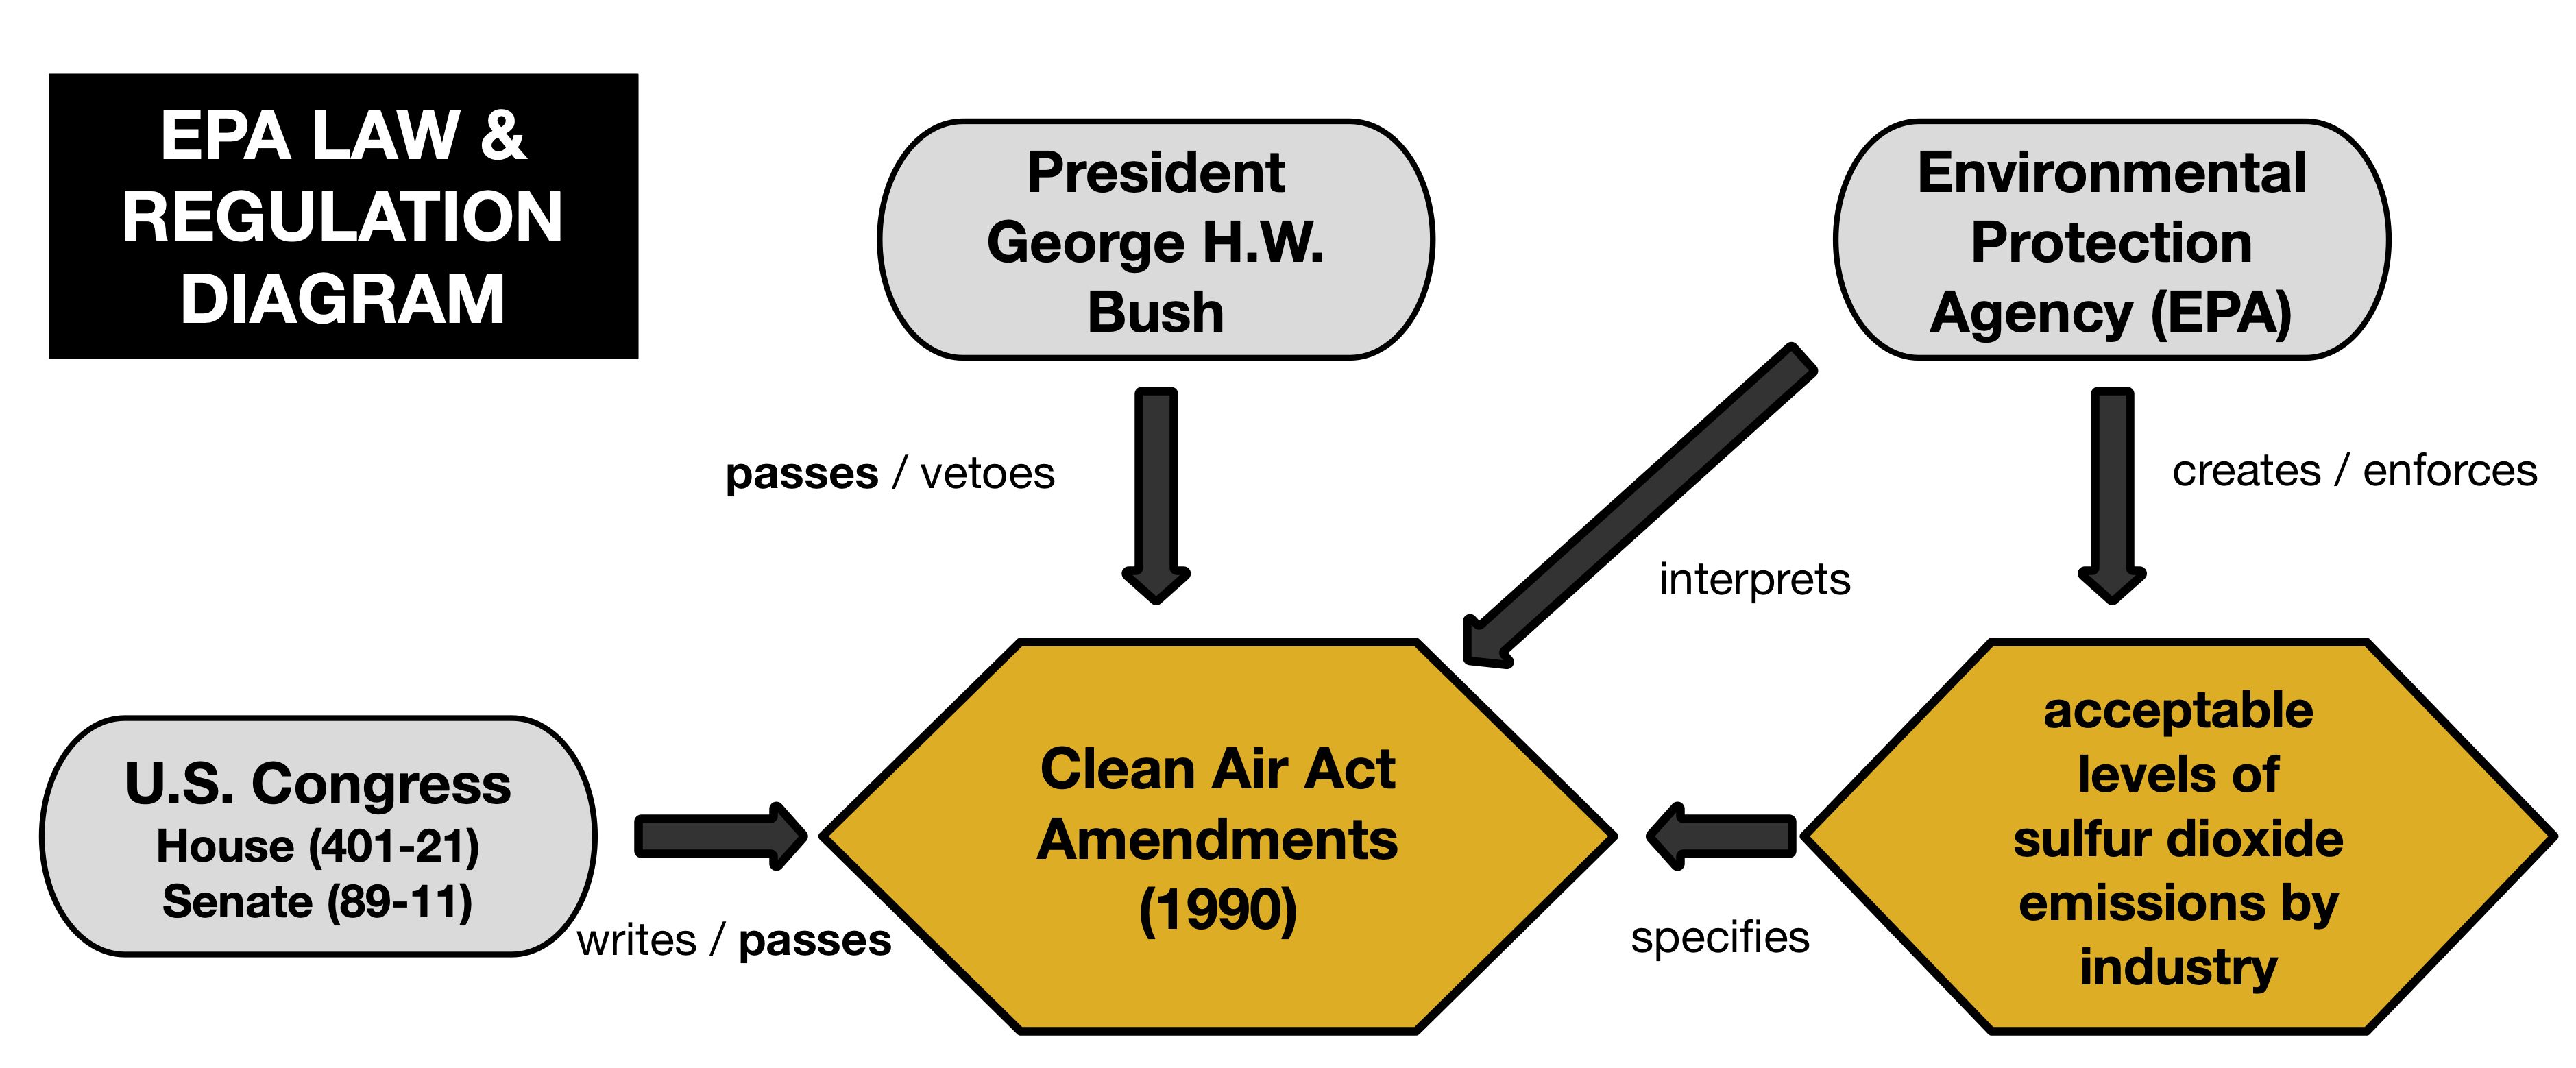 A diagram showing the relationship between branches of government, laws, and regulations